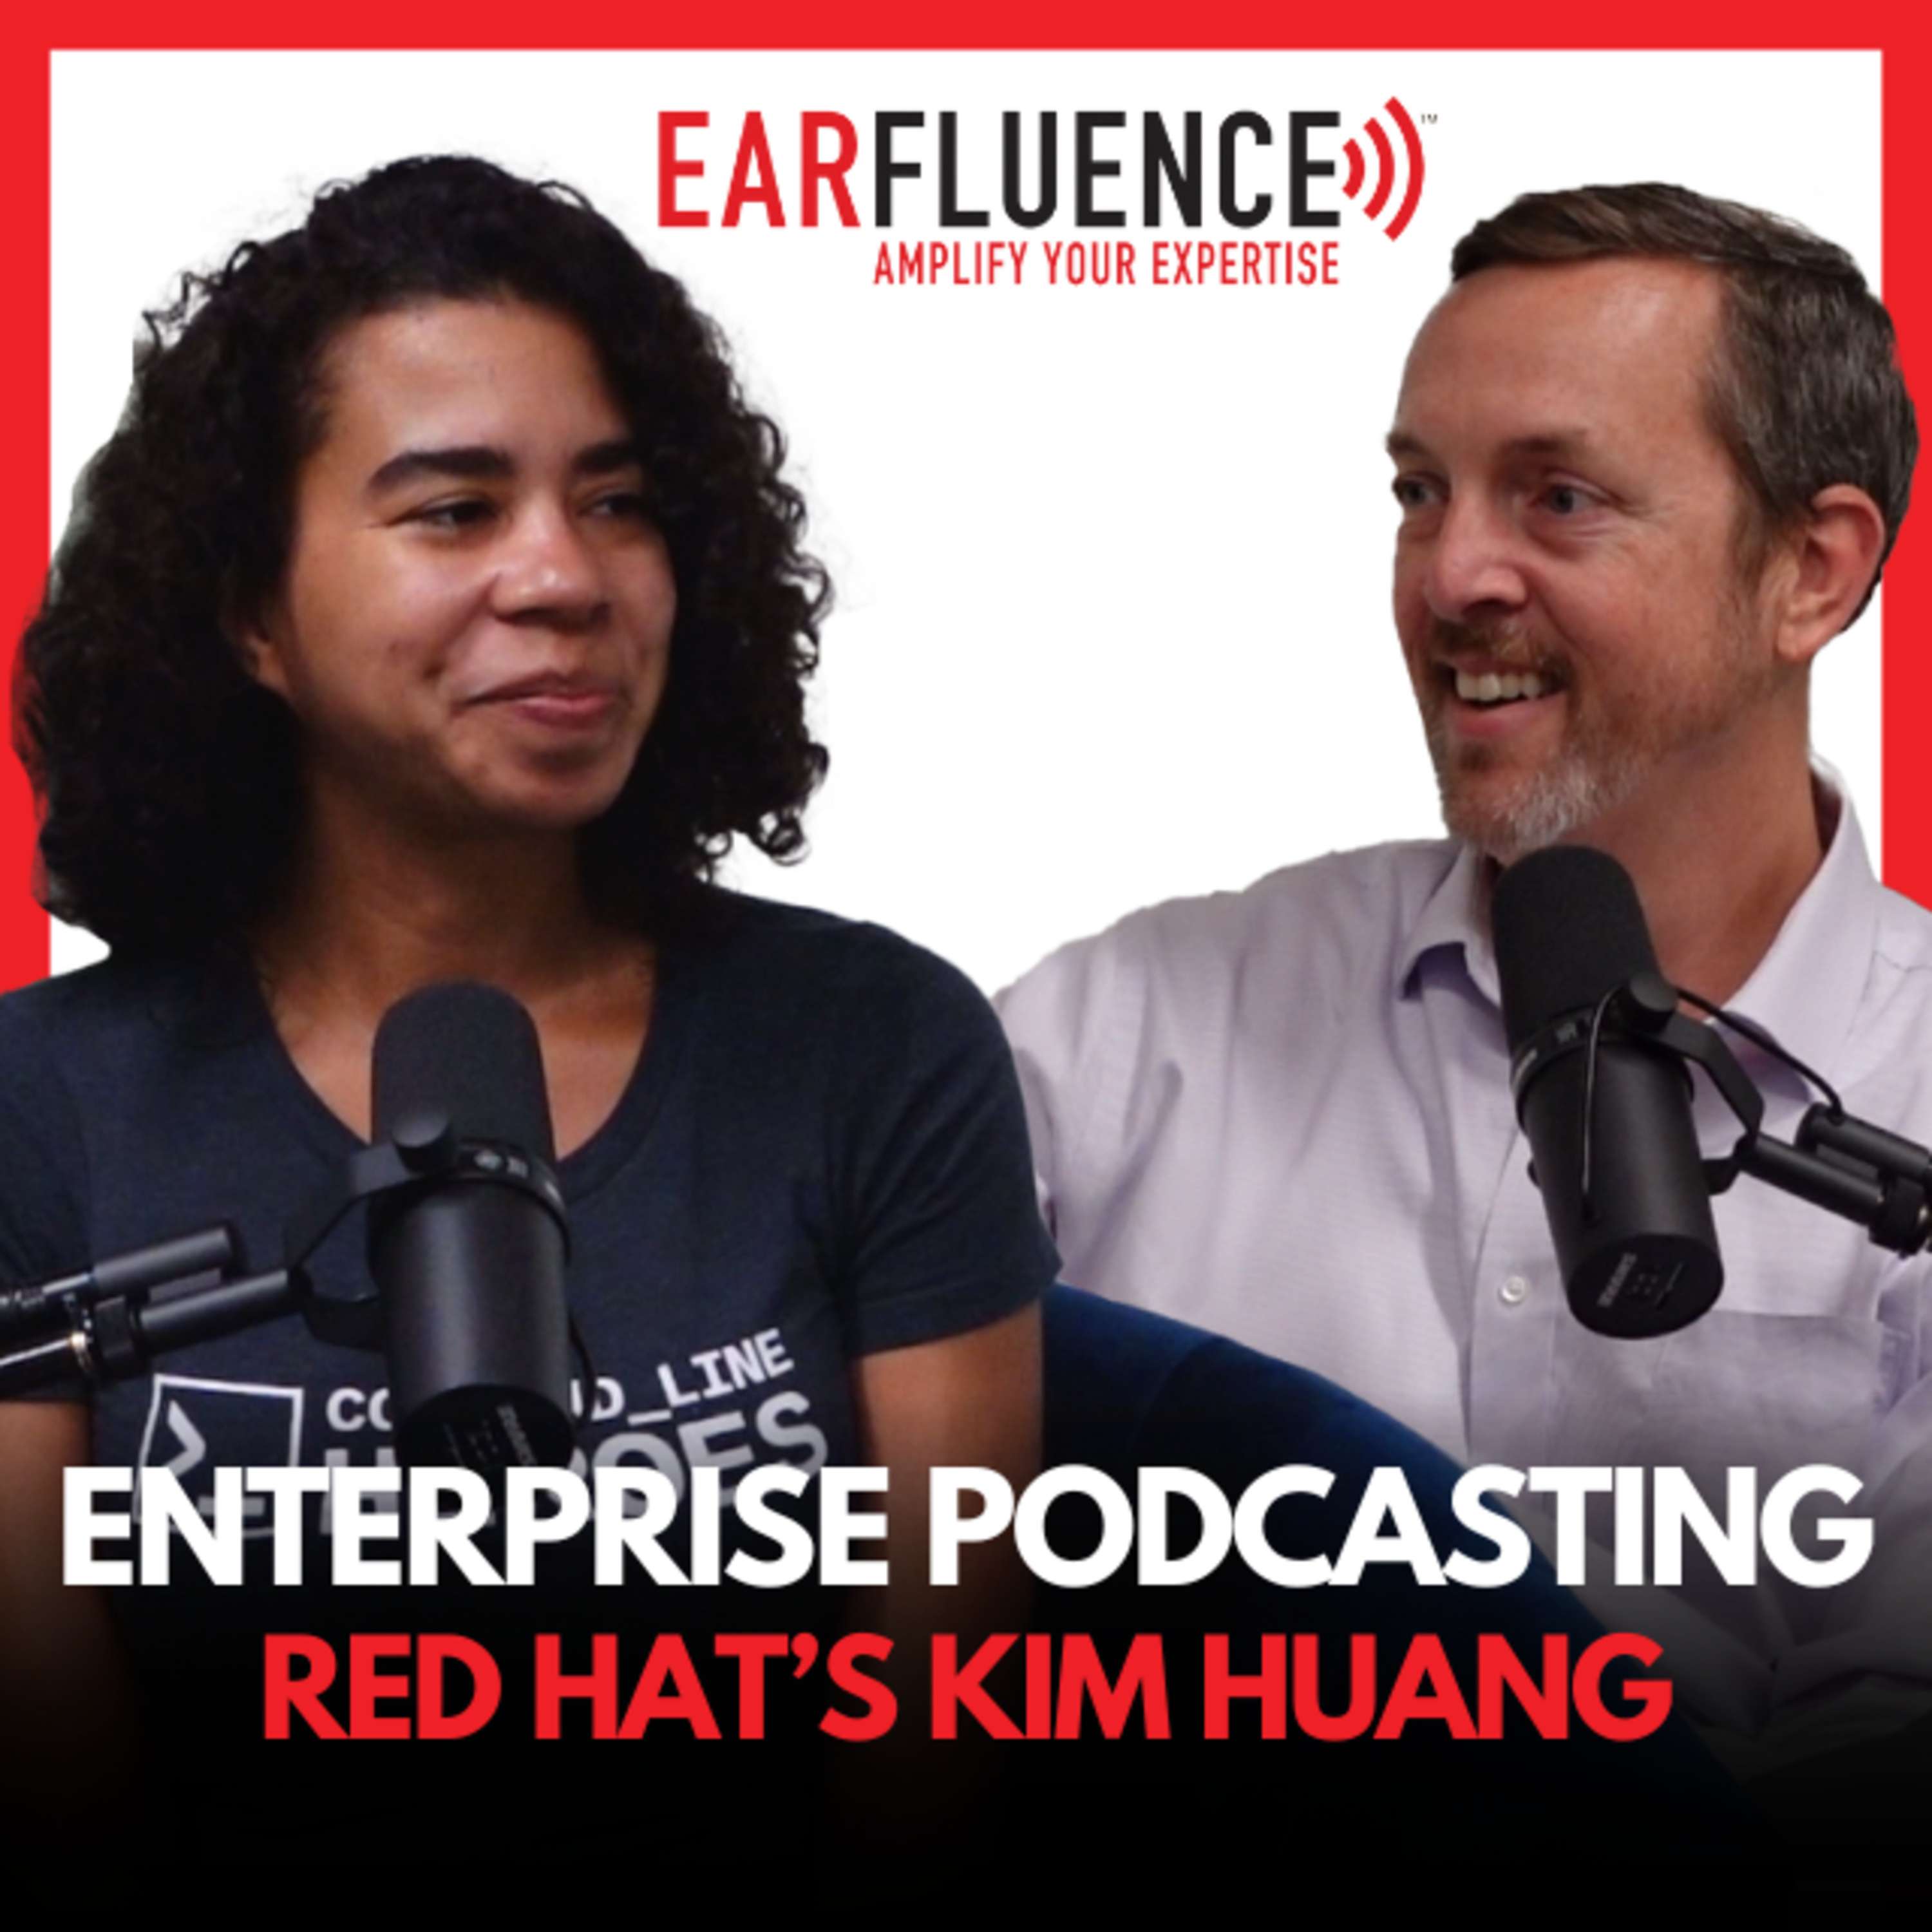 Enterprise Podcasting, with Red Hat’s Kim Huang